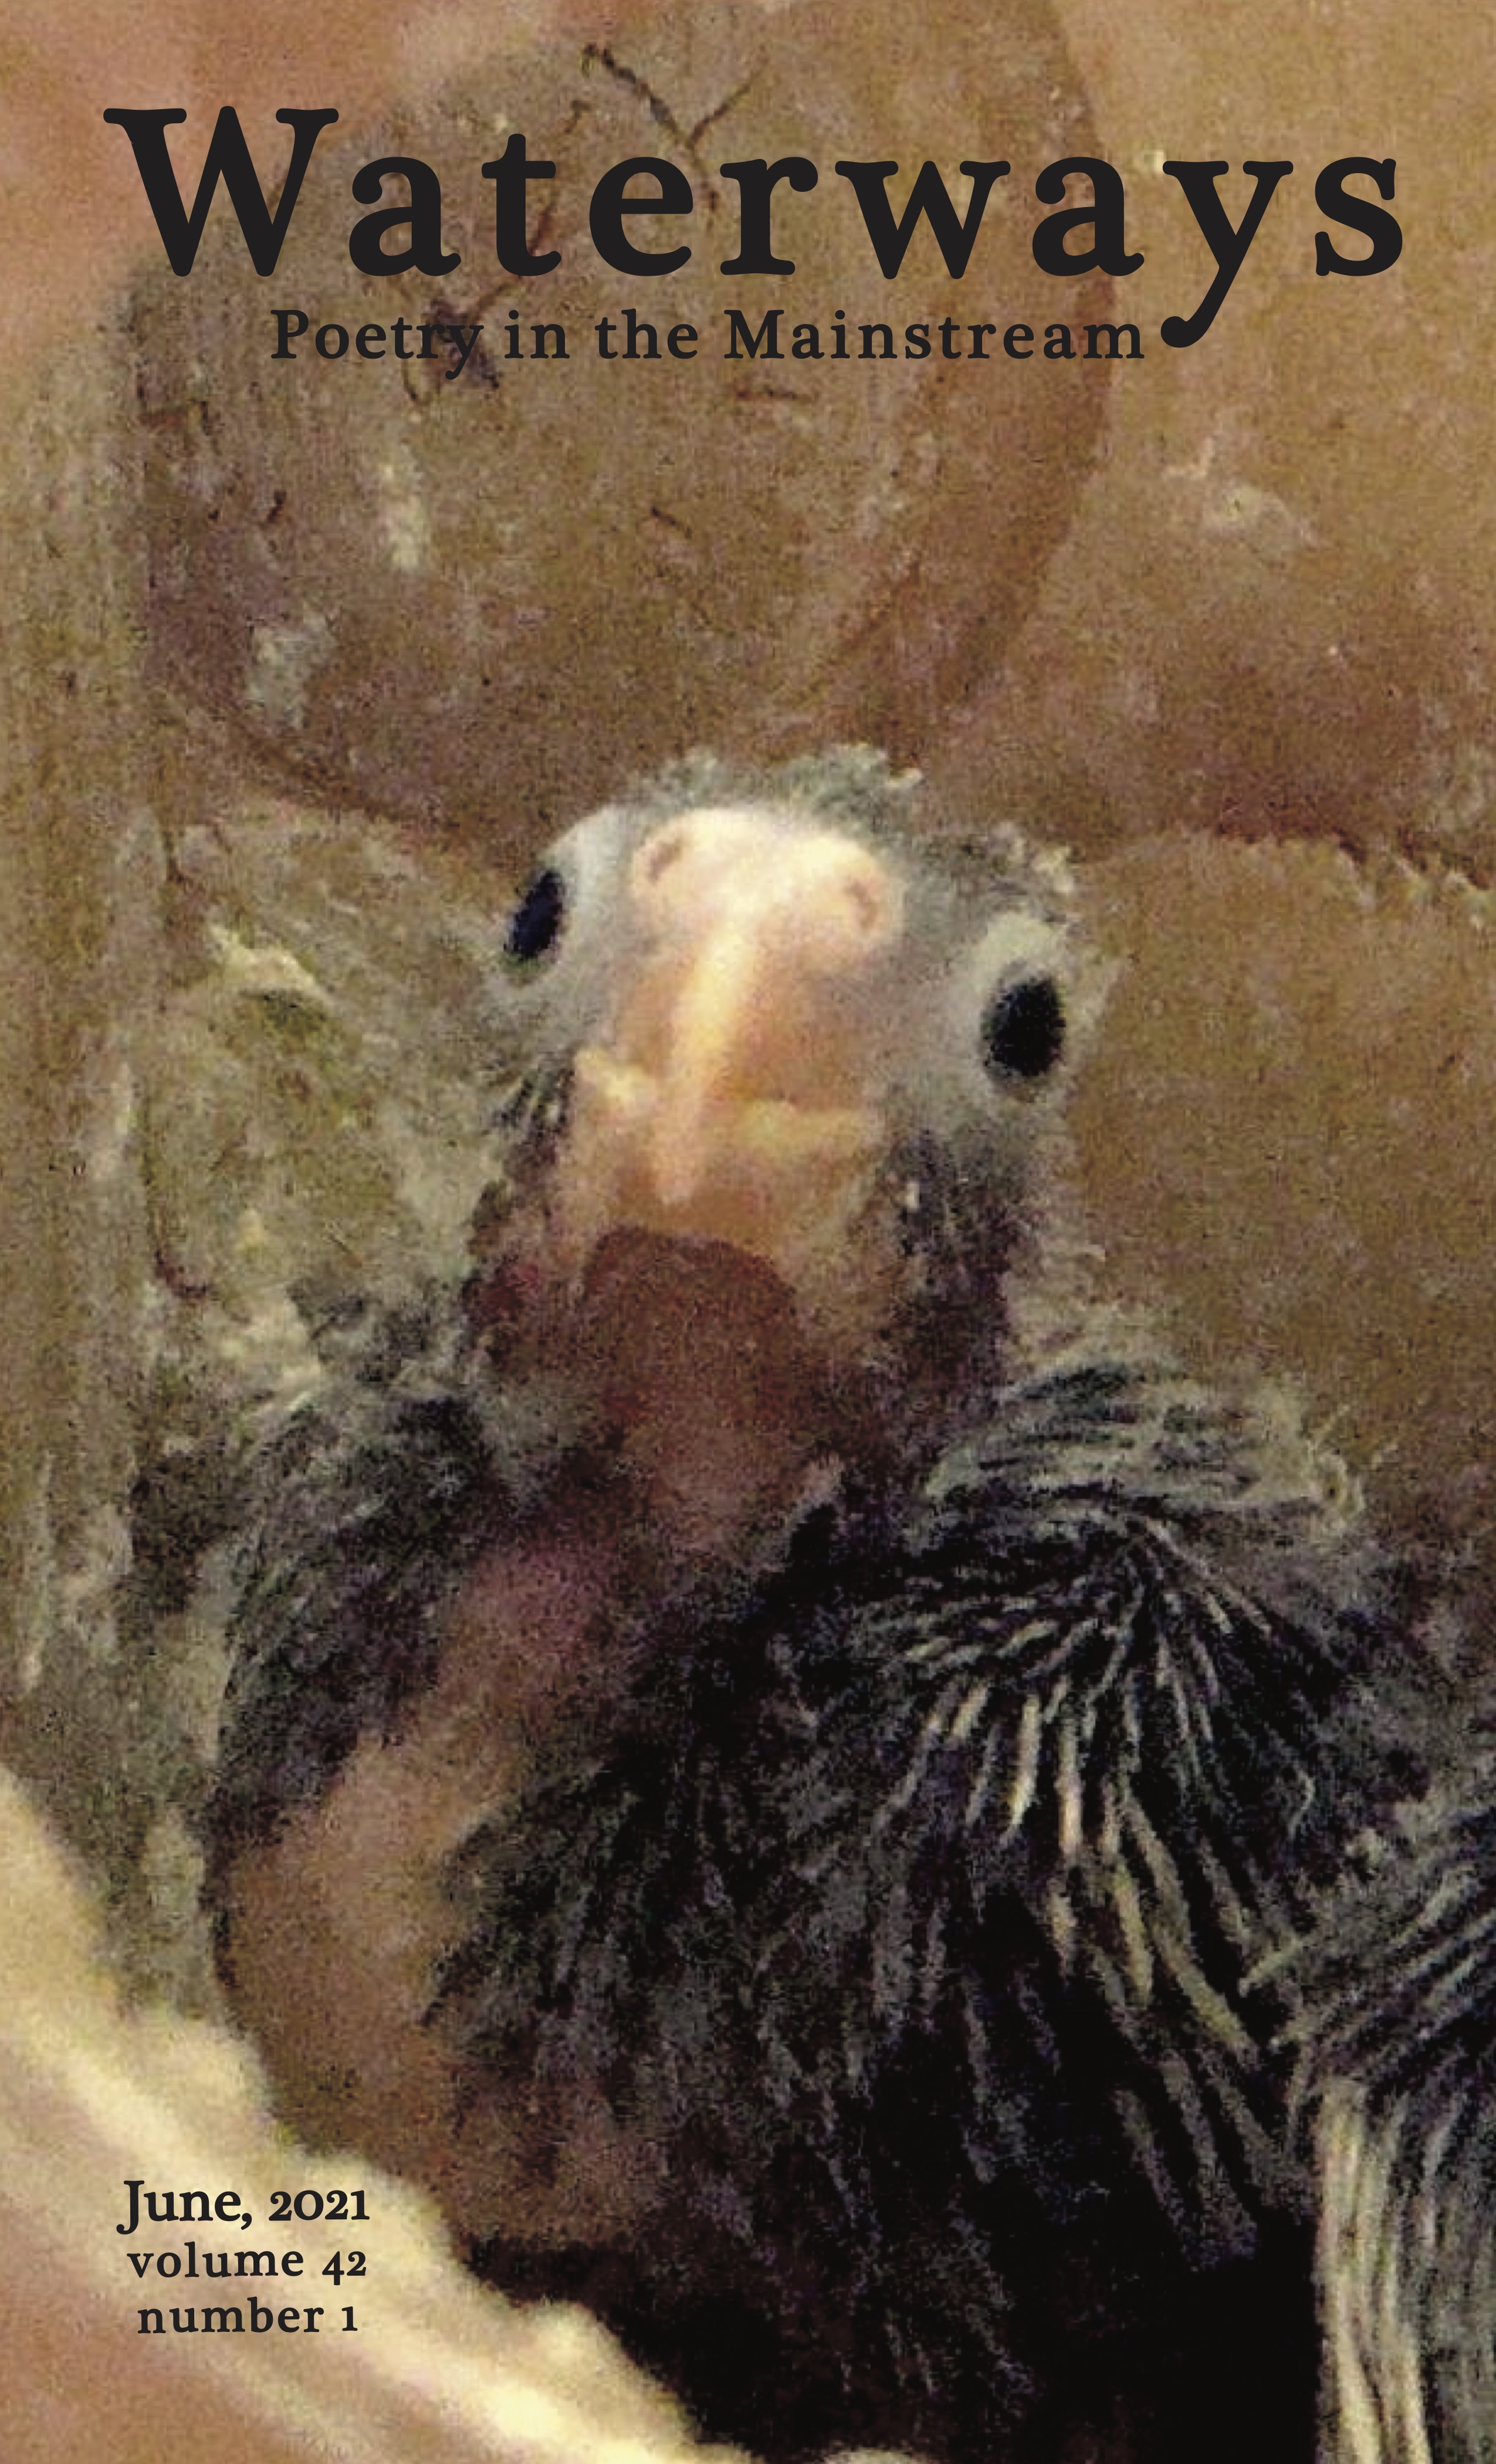 Cover for June shows a cockatiel chick in its nest